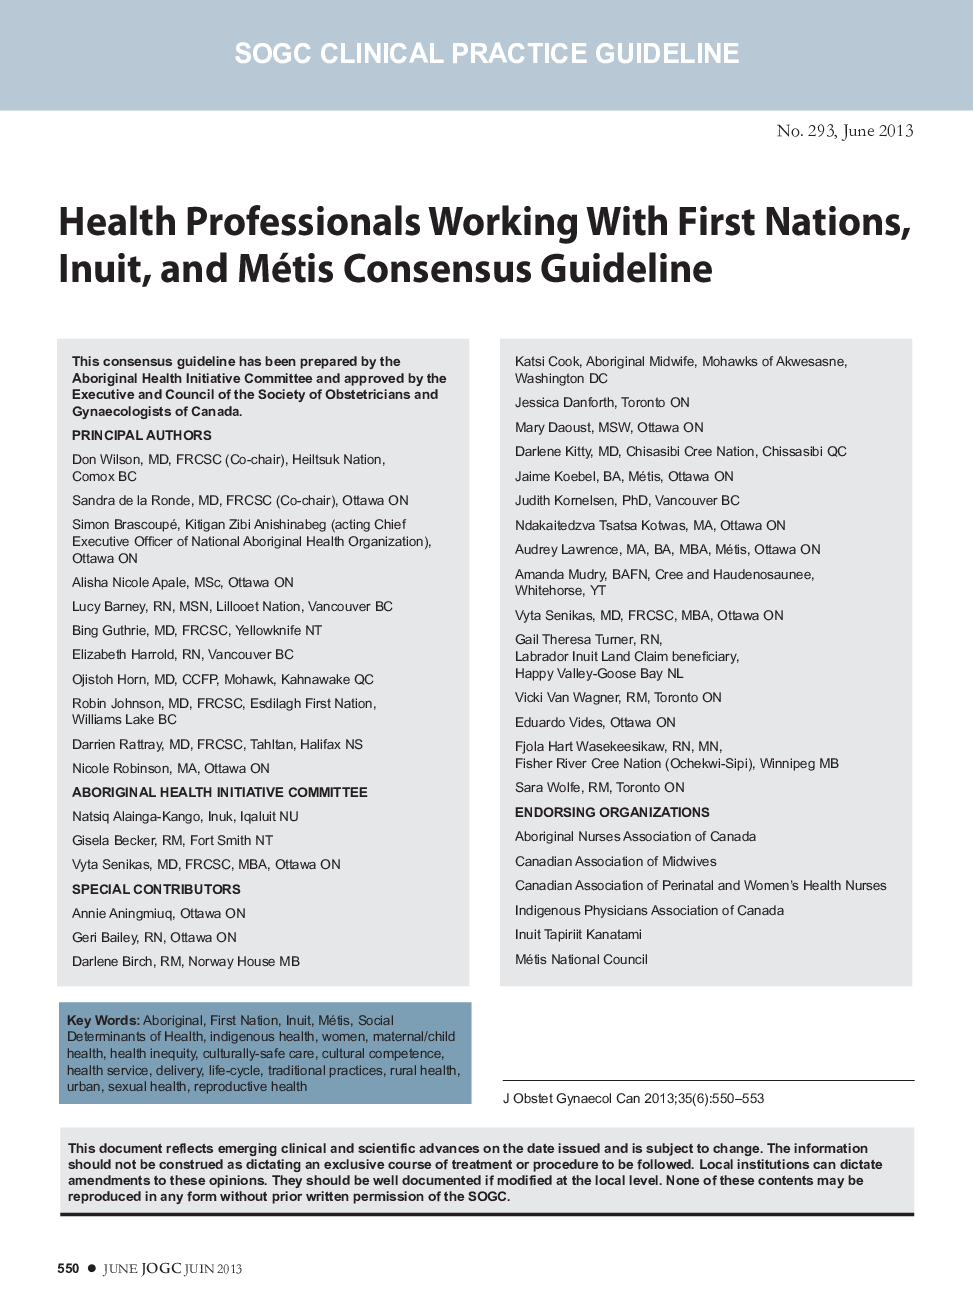 Health Professionals Working With First Nations, Inuit, and Métis Consensus Guideline